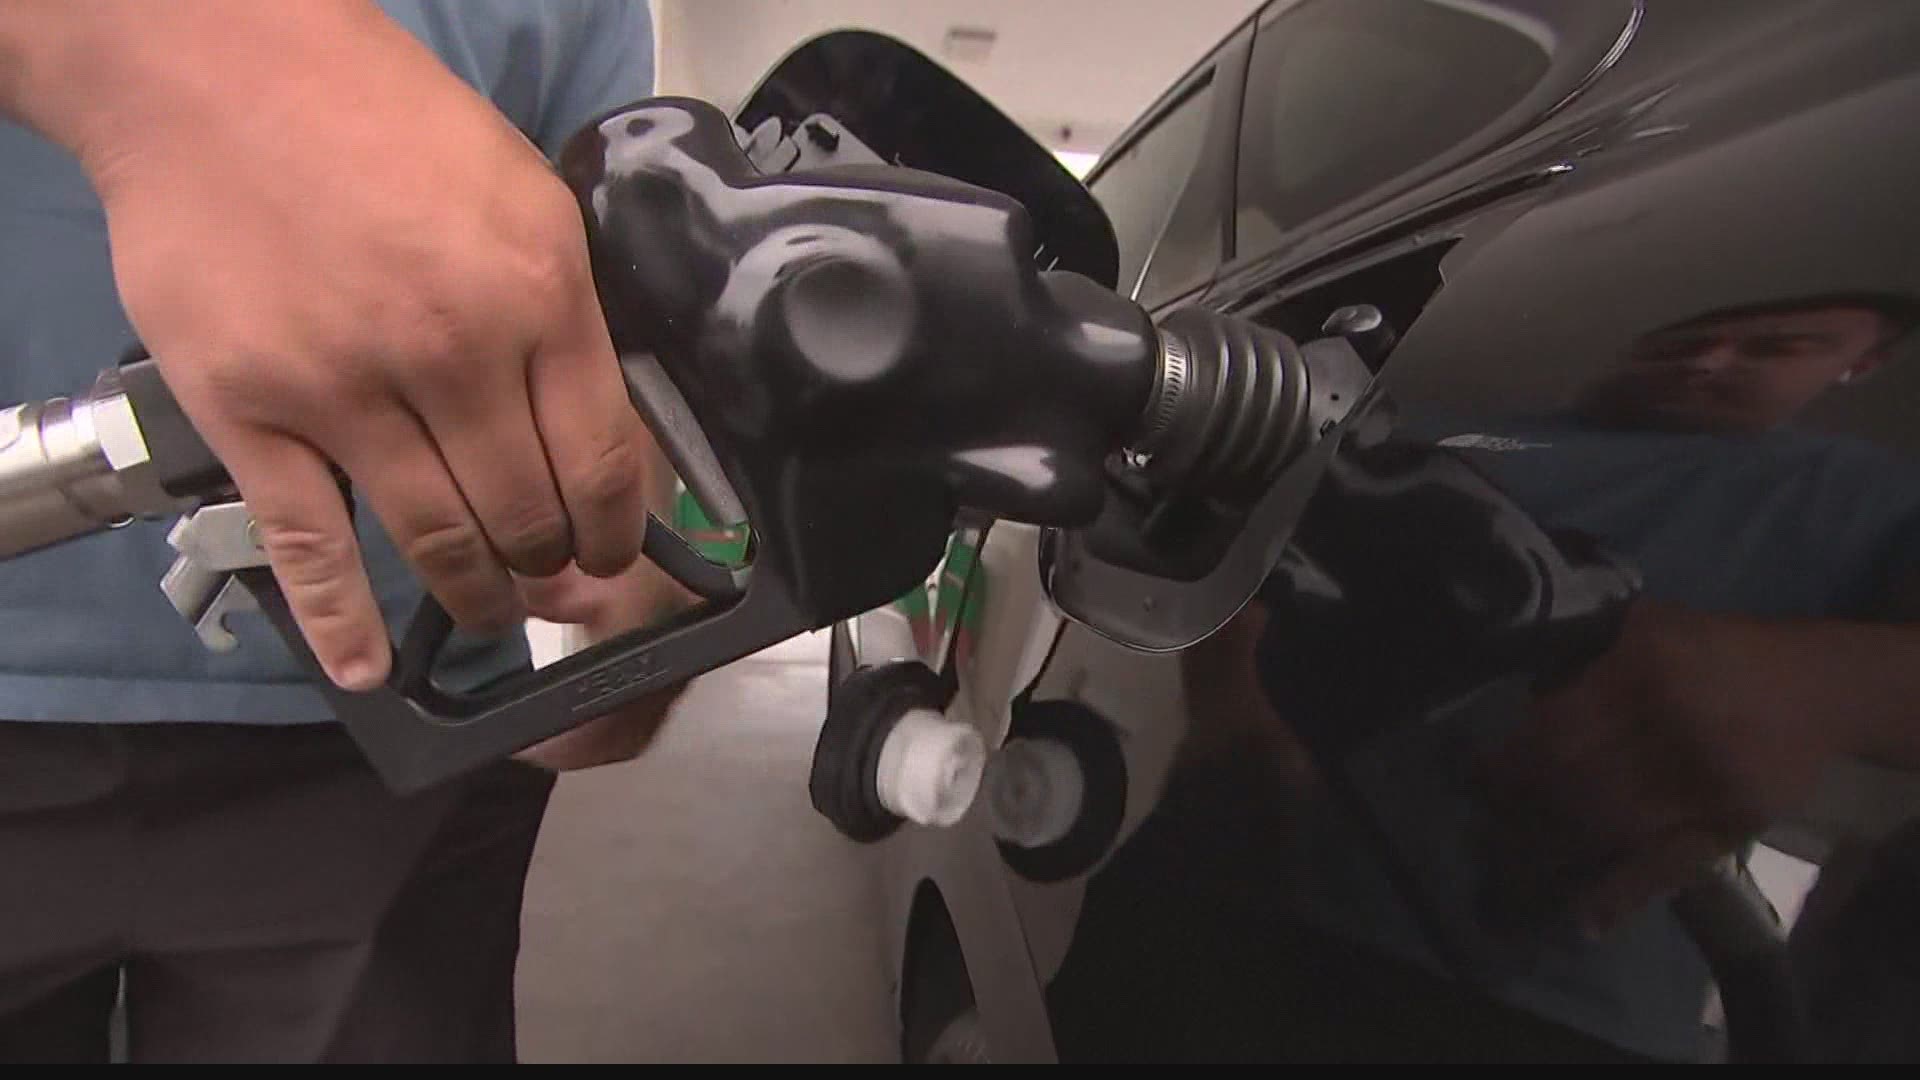 AAA says Indiana's average pump price is currently $3.11